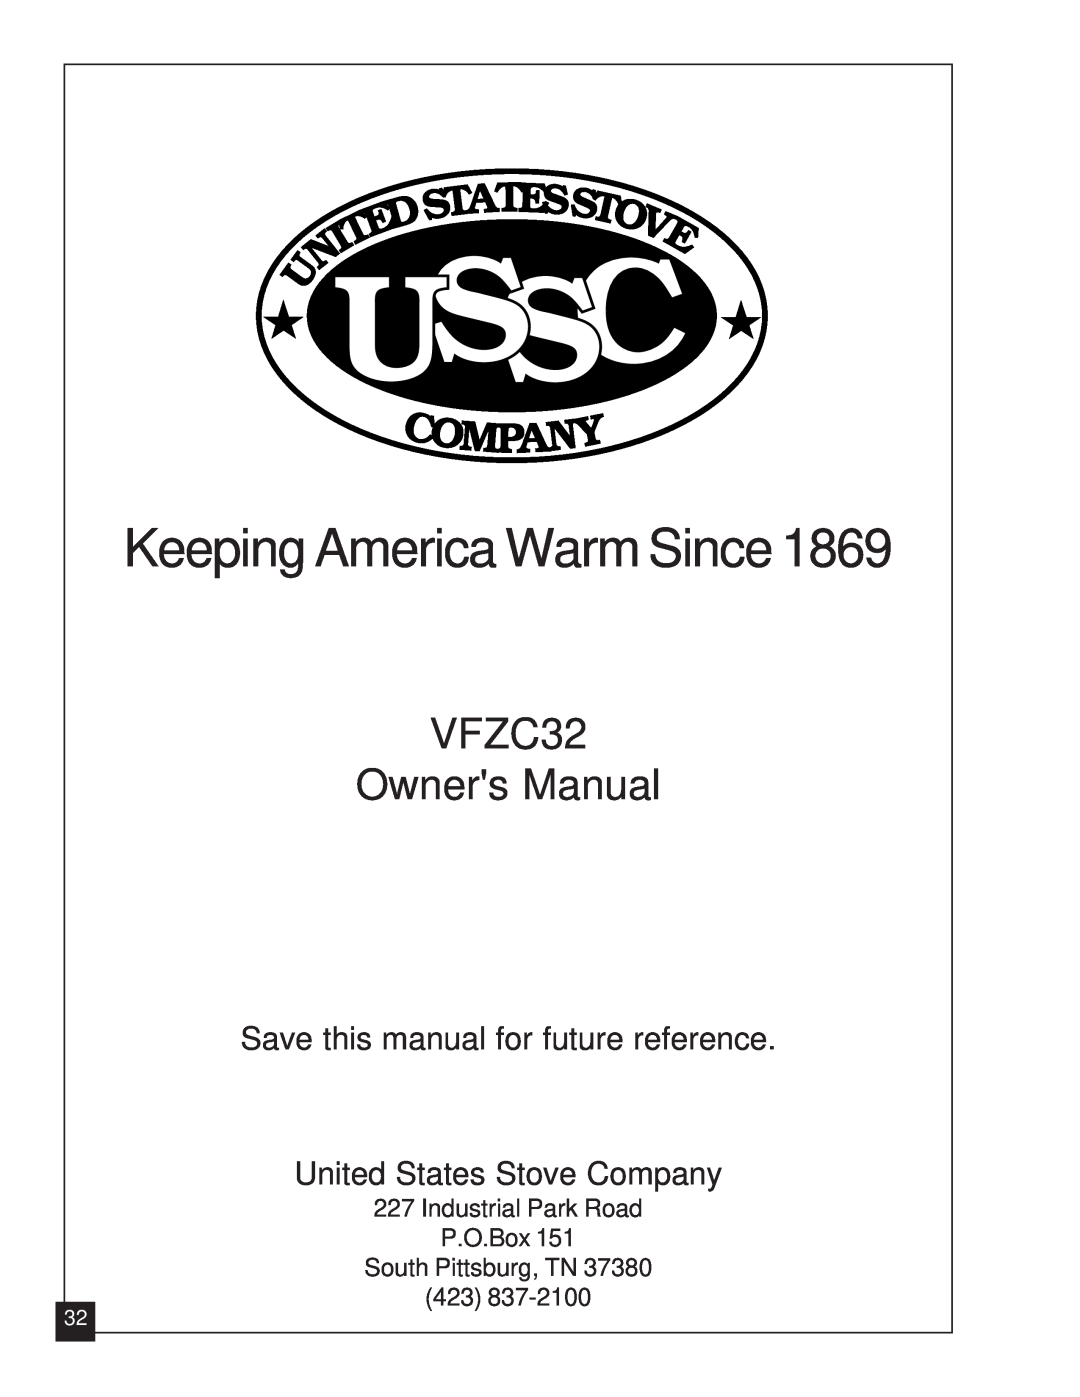 United States Stove VFZC32N Save this manual for future reference, United States Stove Company, South Pittsburg, TN, Ussc 